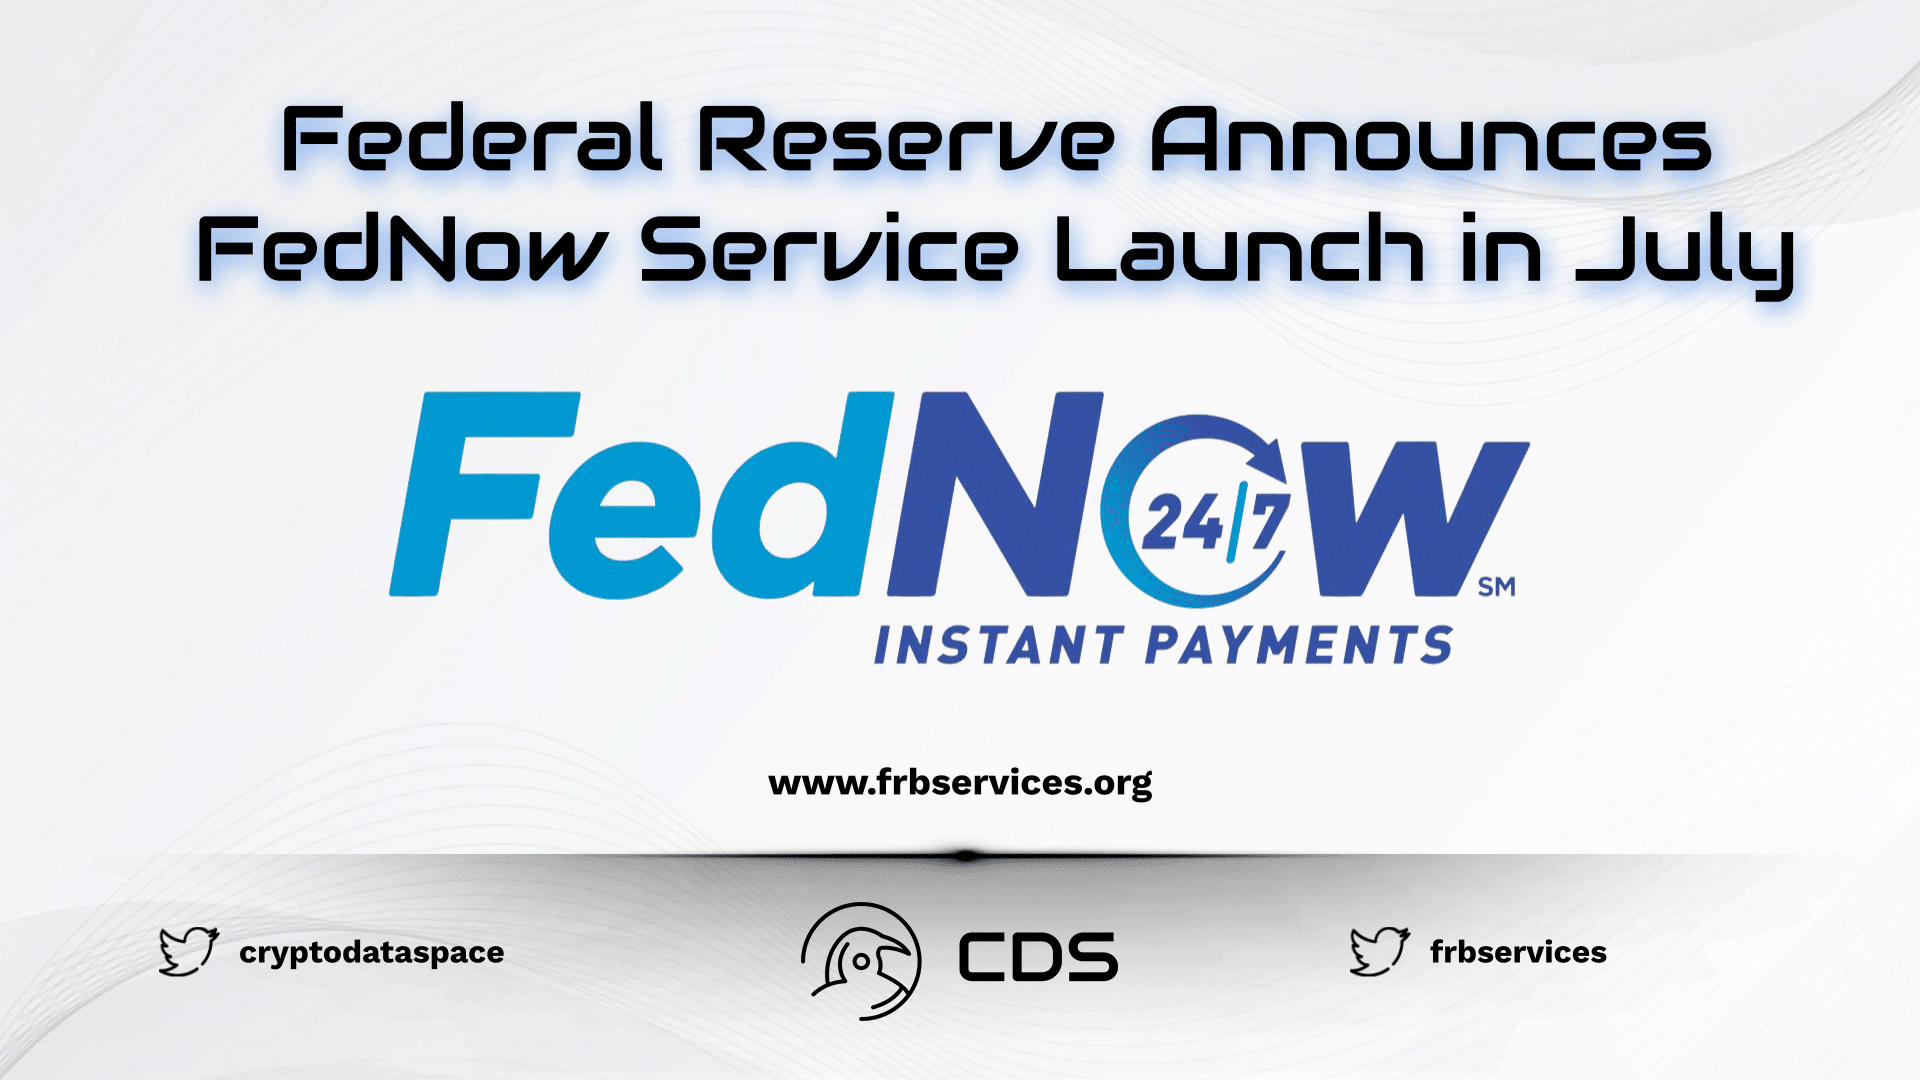 Federal Reserve Announces FedNow Service Launch in July